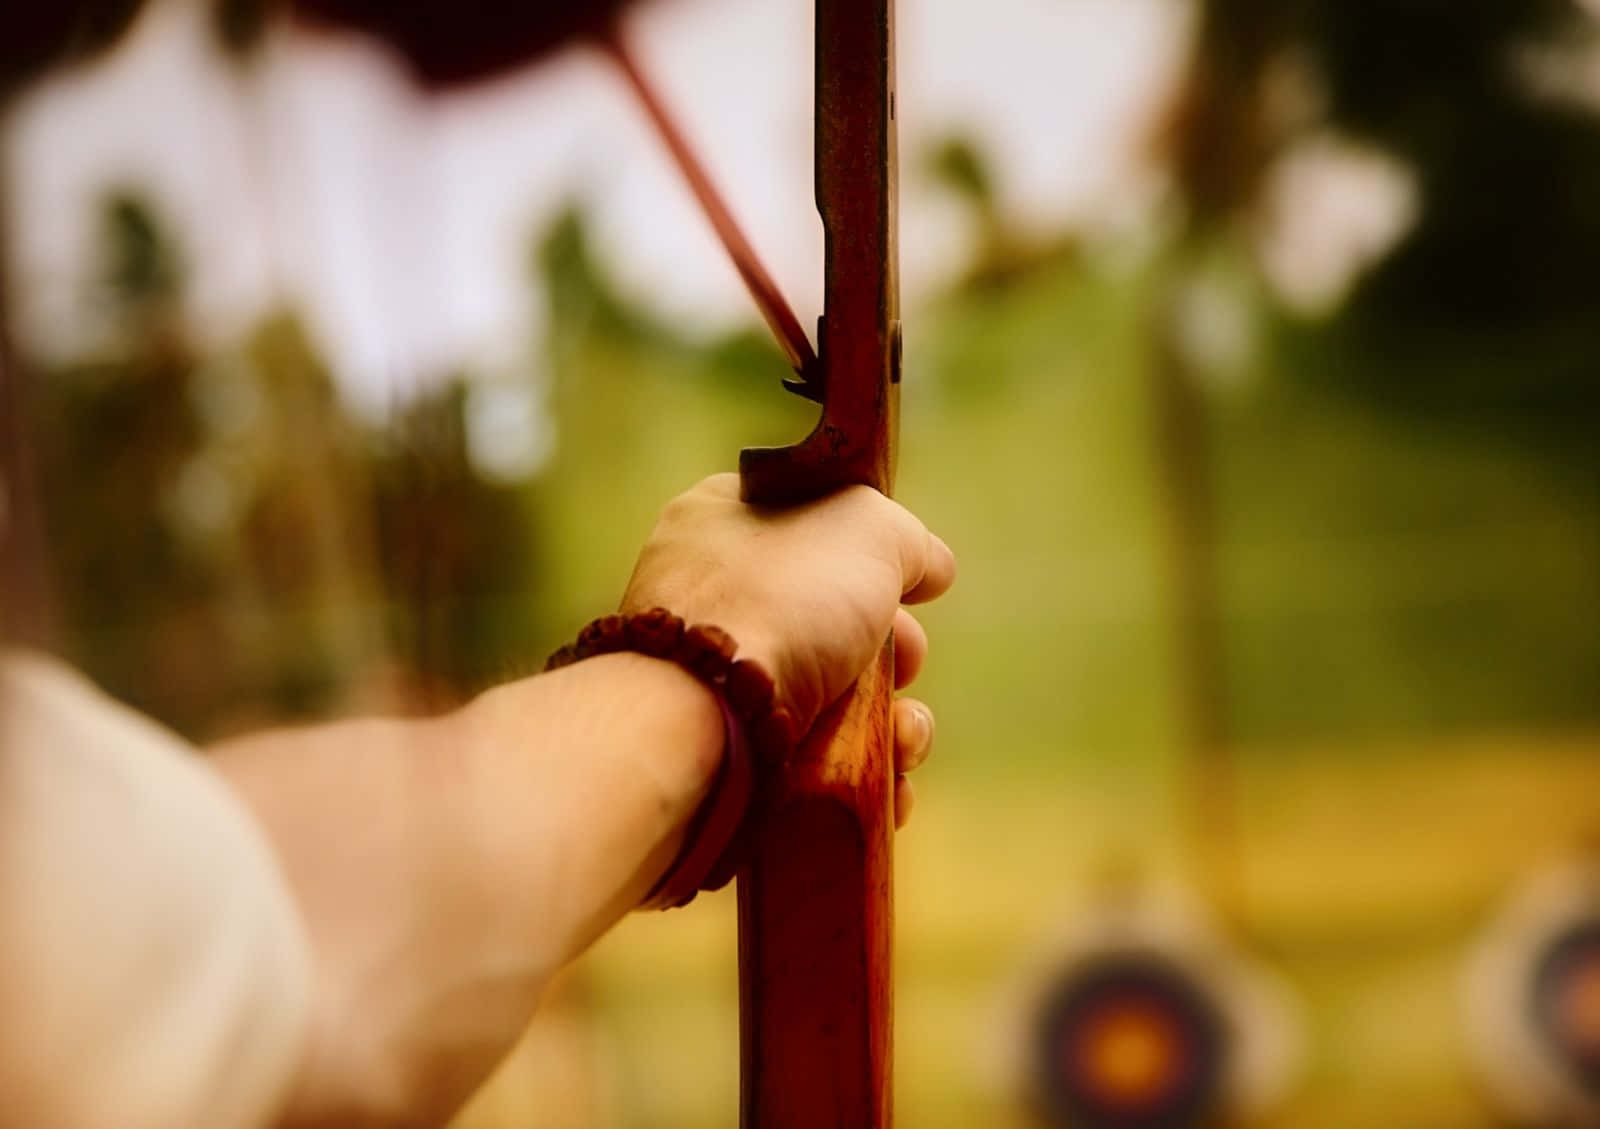 Archery - A Person Holding A Bow